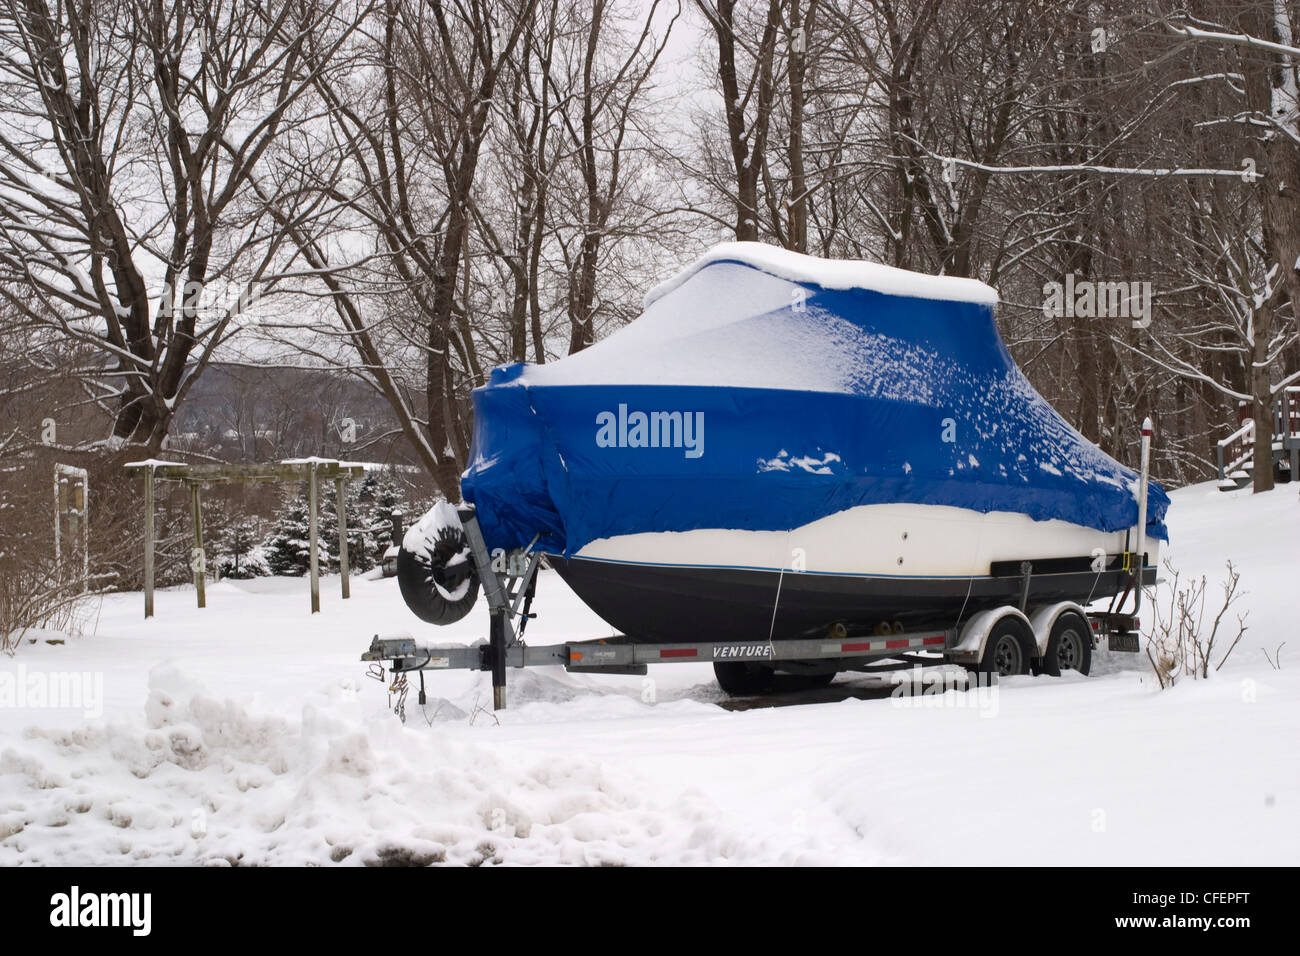 A motorboat waits for warmer weather in the yard of a New England home. Stock Photo